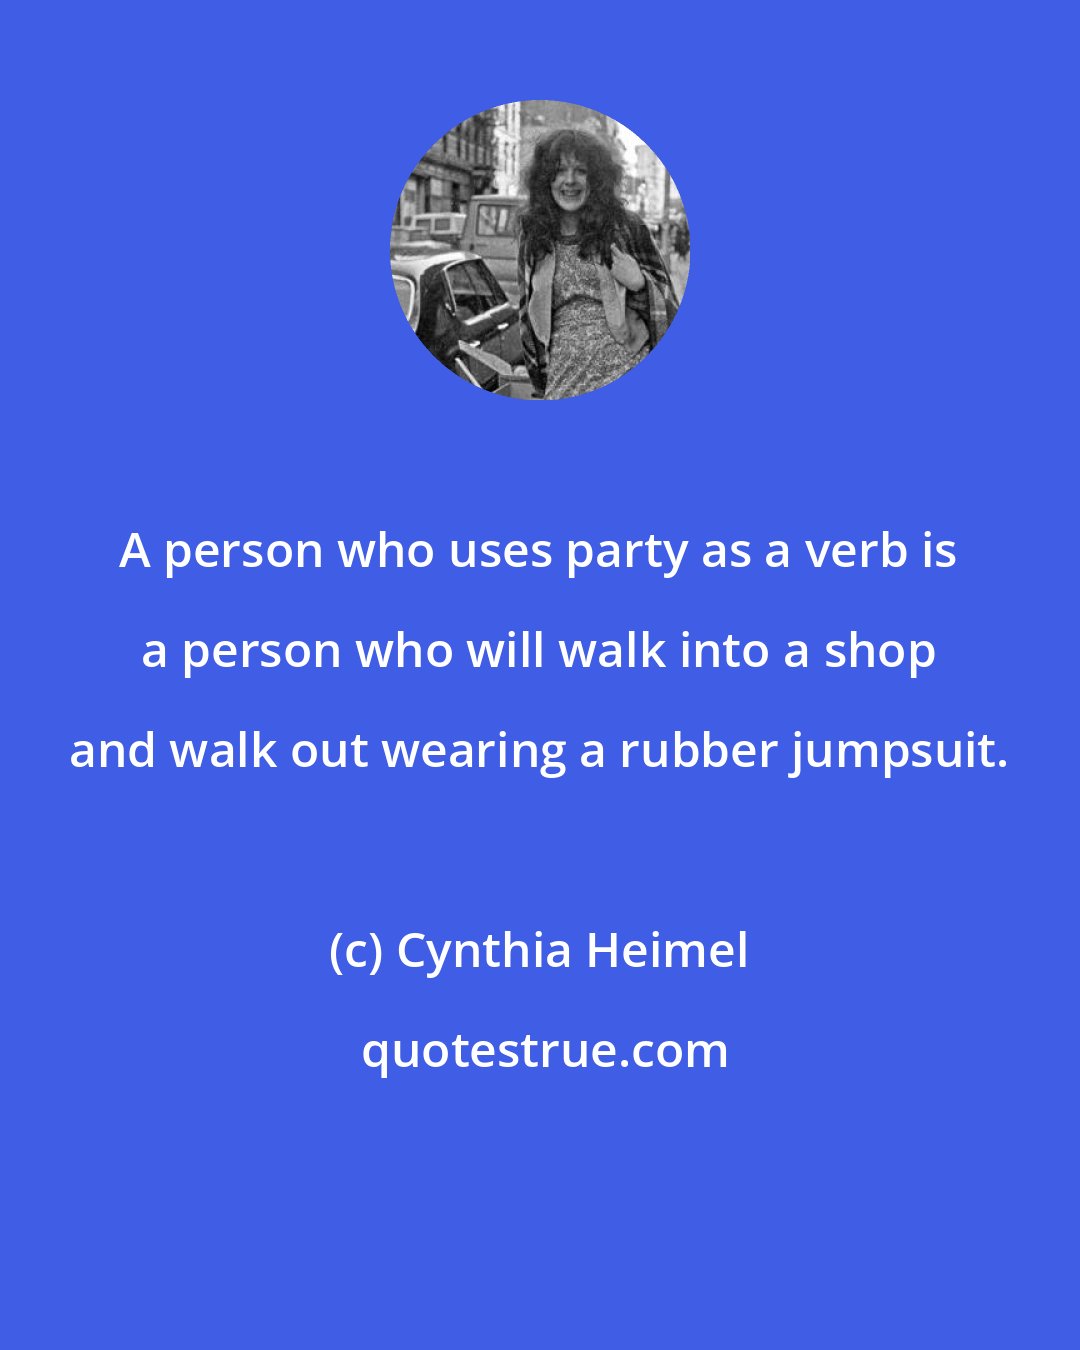 Cynthia Heimel: A person who uses party as a verb is a person who will walk into a shop and walk out wearing a rubber jumpsuit.